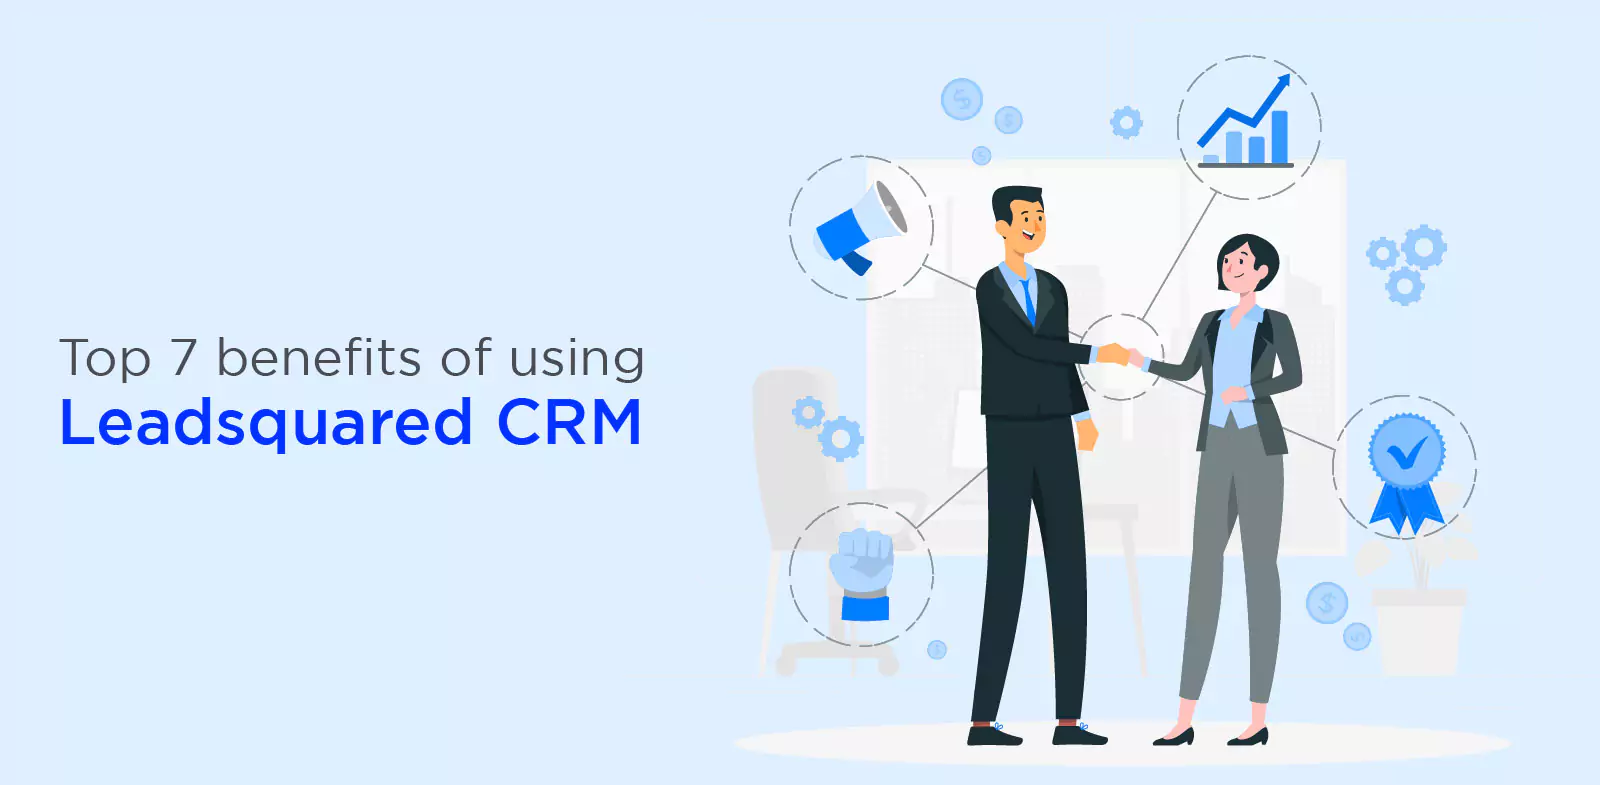 Top 7 benefits of using Leadsquared CRM